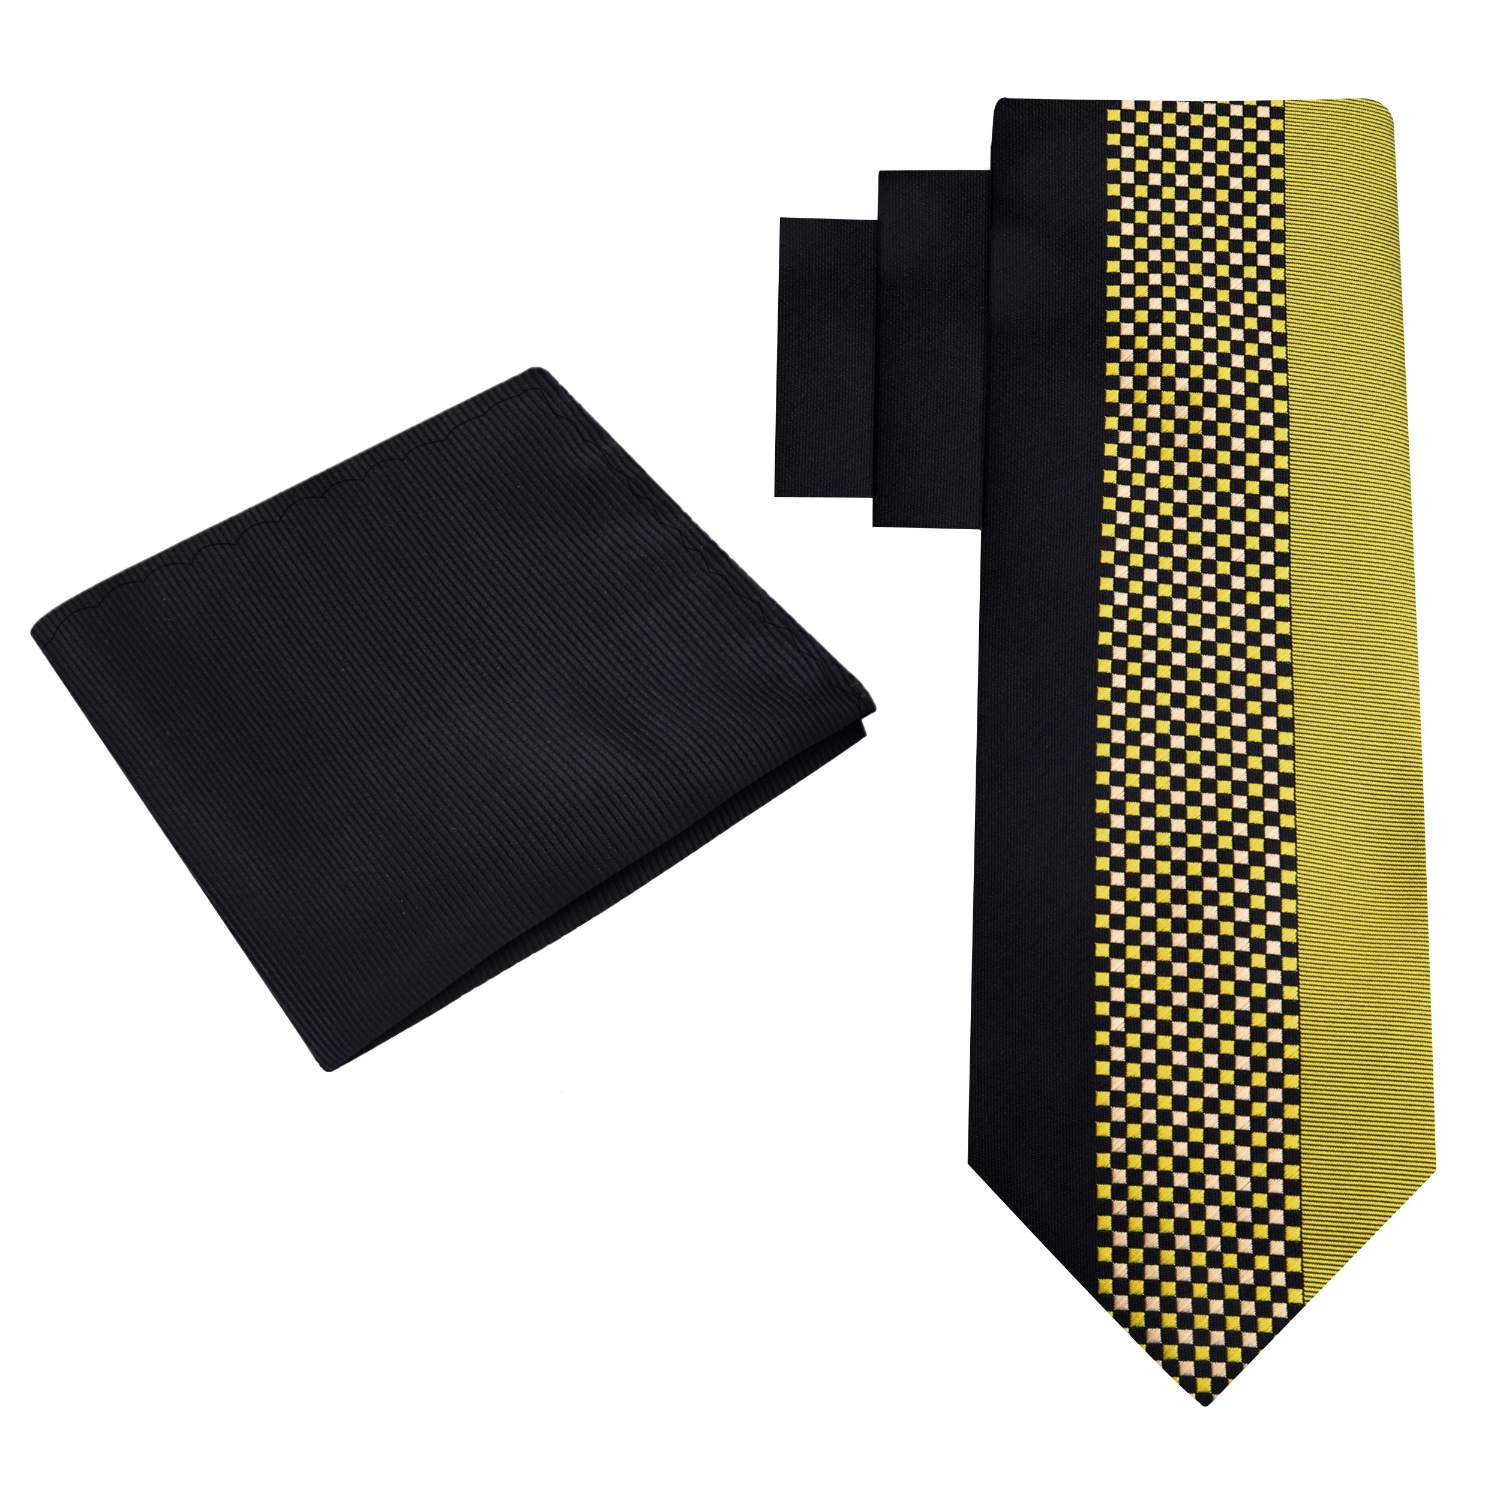 Alt View: Gold and Black Small Check Necktie and Black Square